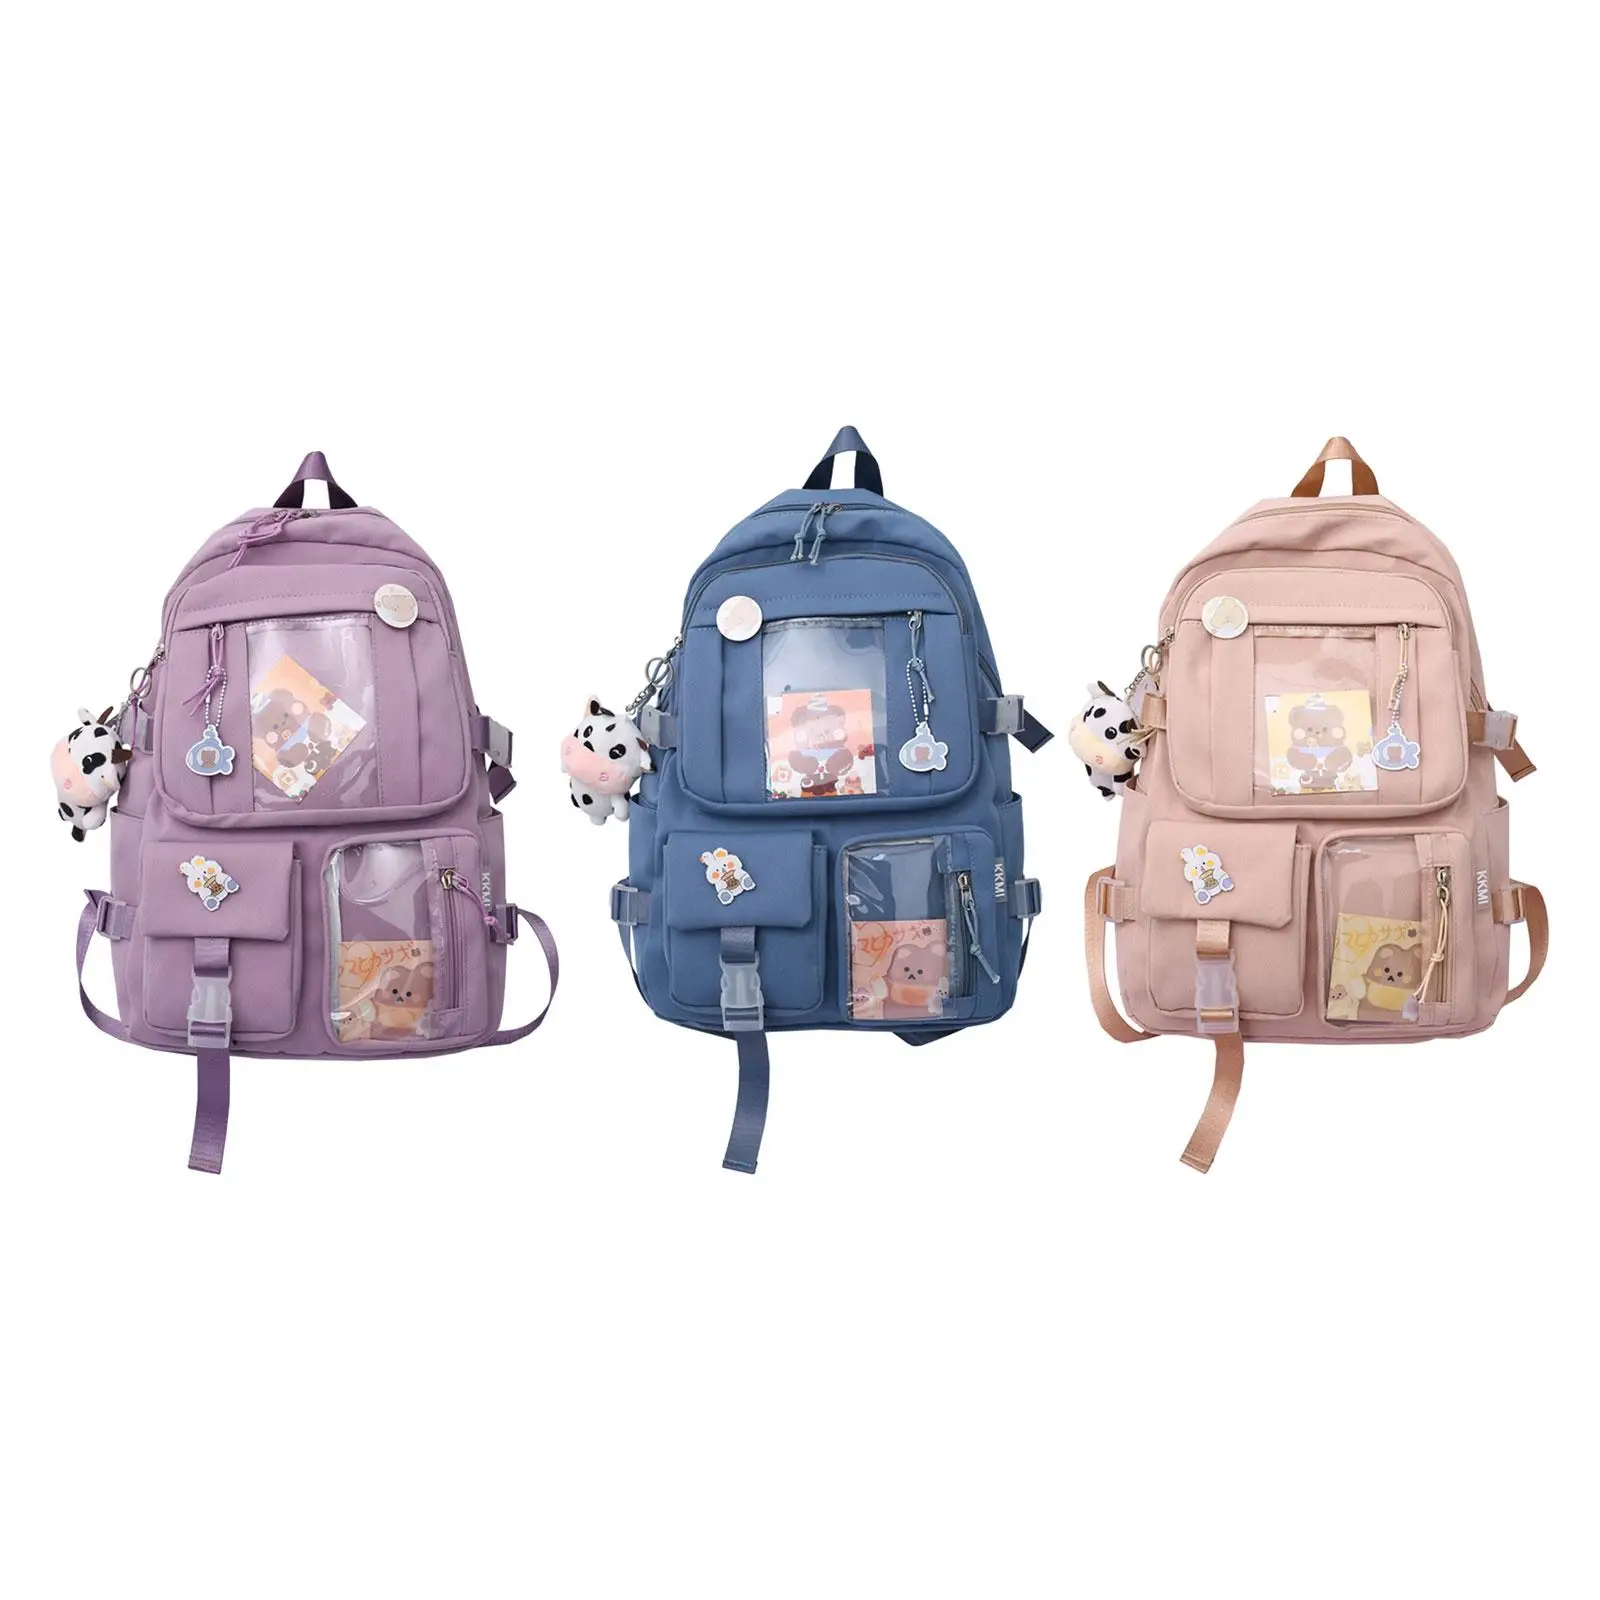 Women Backpack with Side Pockets Fashion Bookbag Travel Book Bags Schoolbag for Elementary Students Female Young Kids Girls Boys